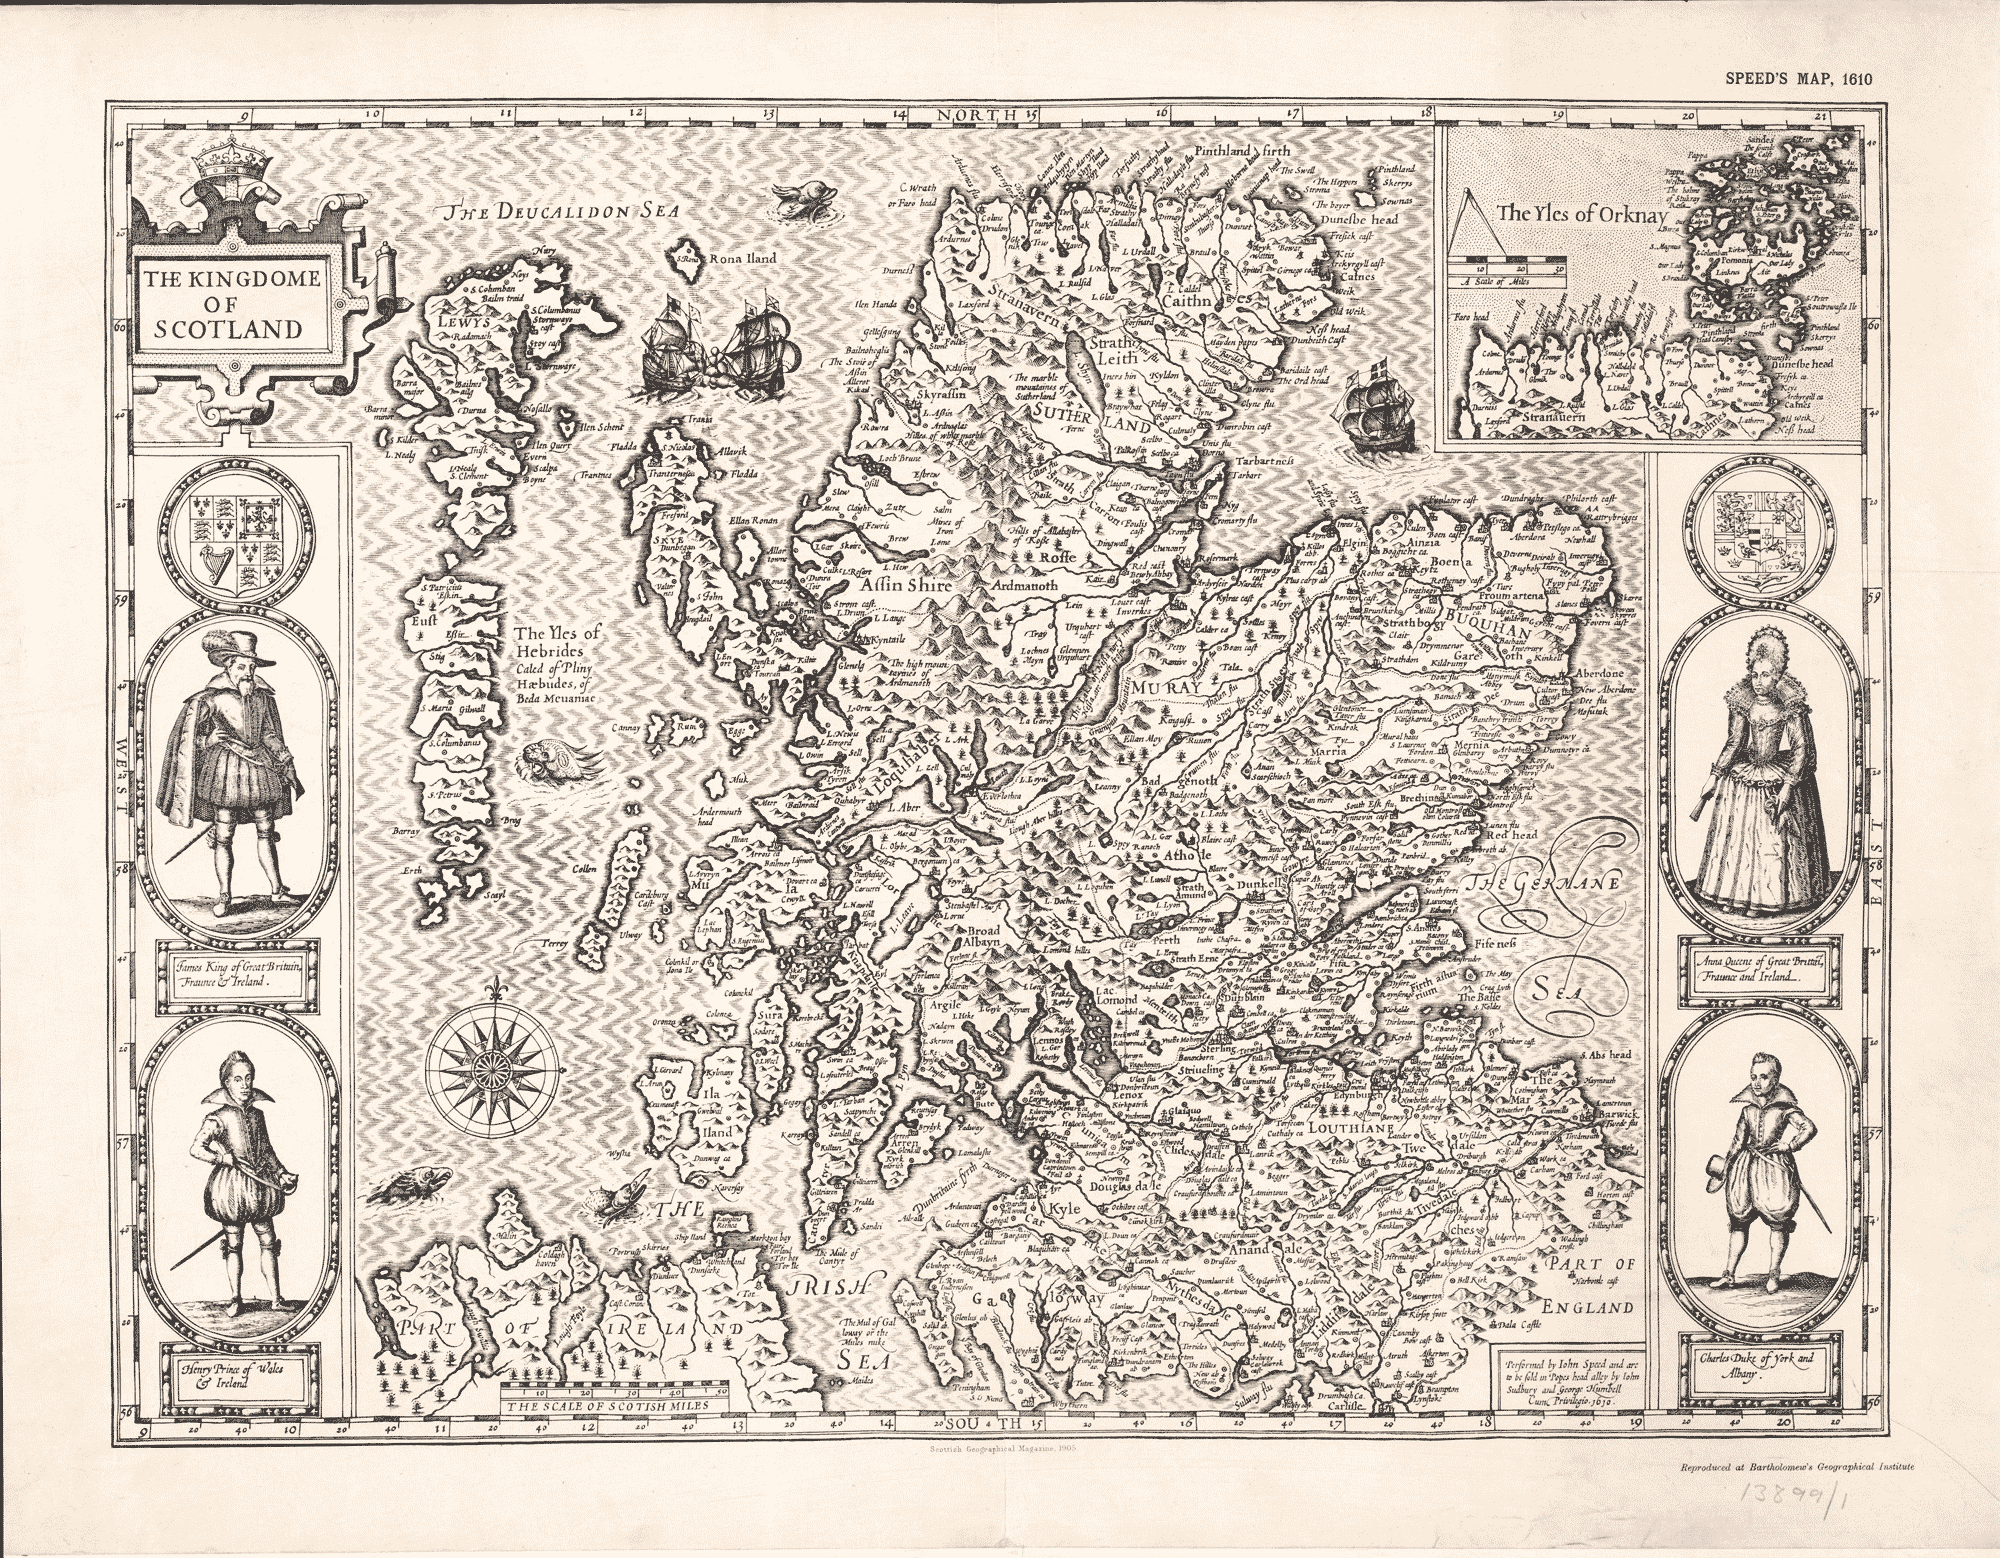 Map of the Kingdom of Scotland, 1610, made by the famous English cartographer, John Speed, and published in an atlas called The Theatre of the Empire of Great Britain in 1612. National Records of Scotland reference: RHP 13899/1. Reproduced by permission of the National Library of Scotland.